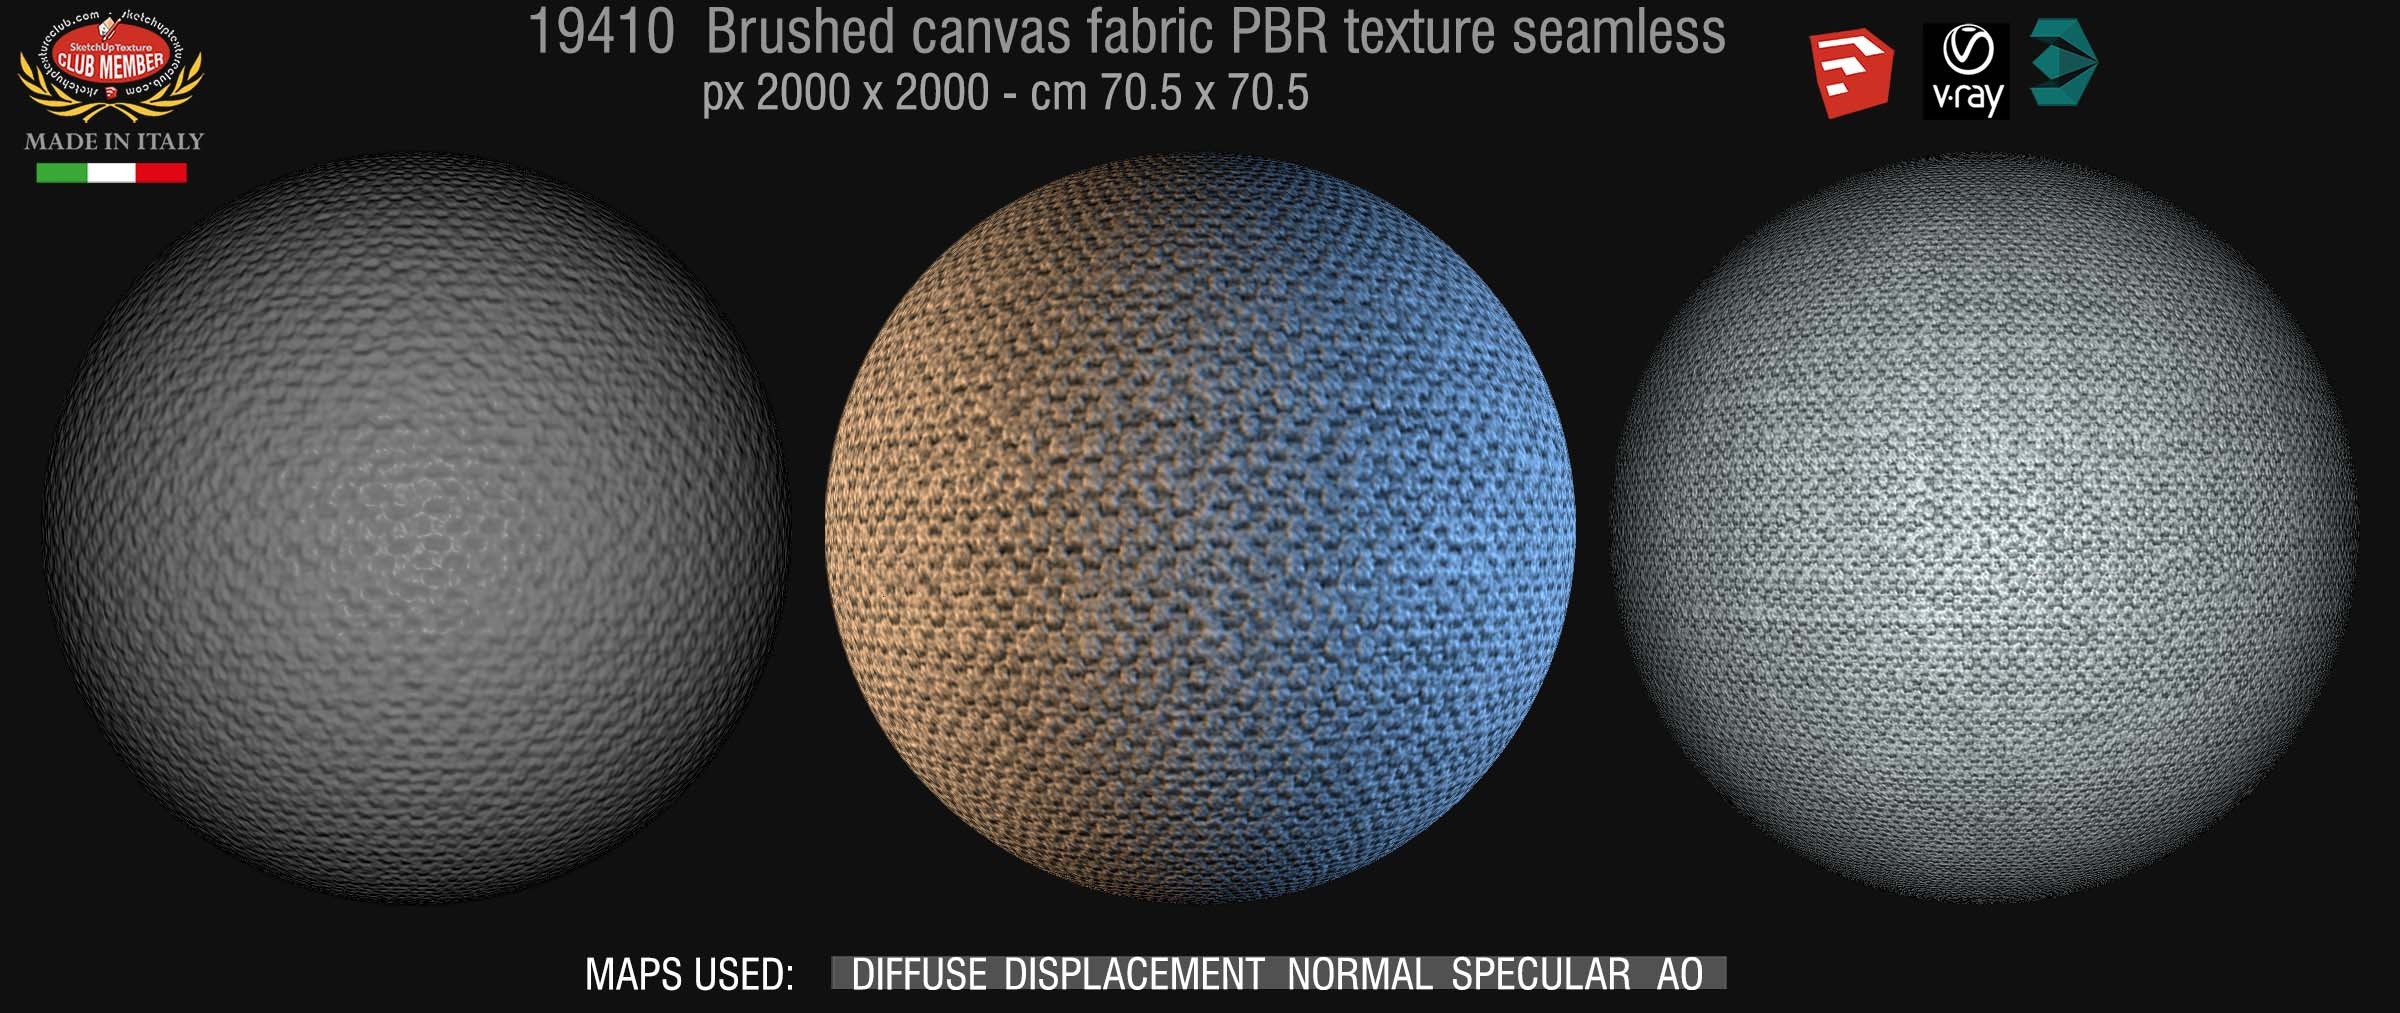 19410 Brushed canvas fabric PBR texture seamless DEMO